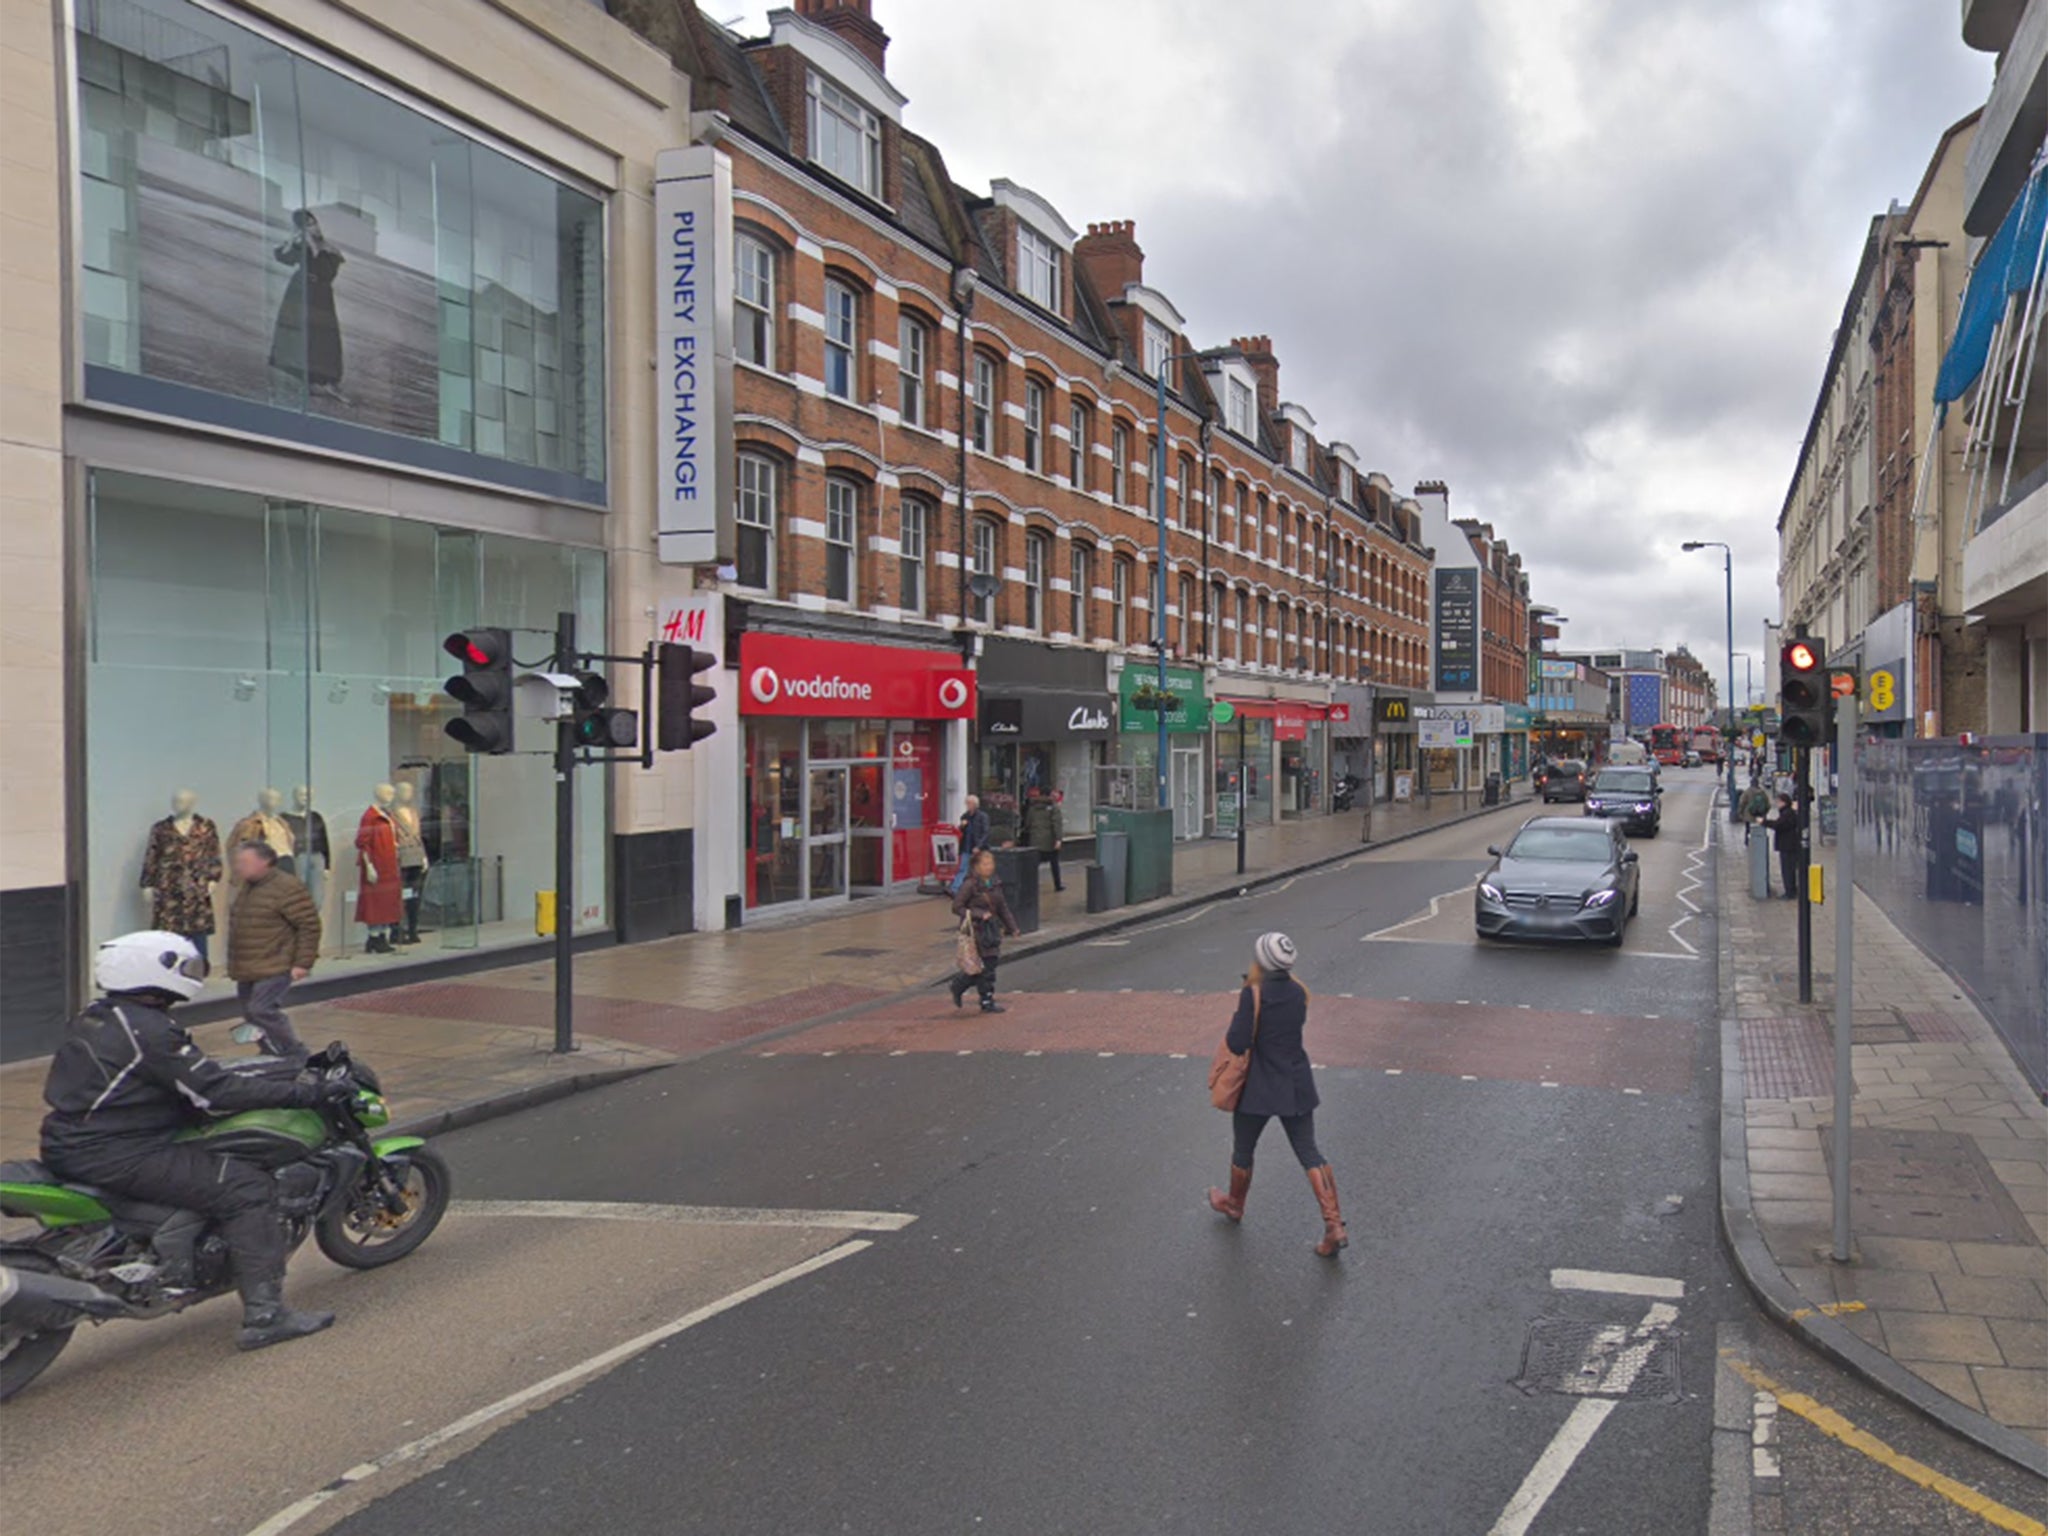 The incident took place on Putney High Street